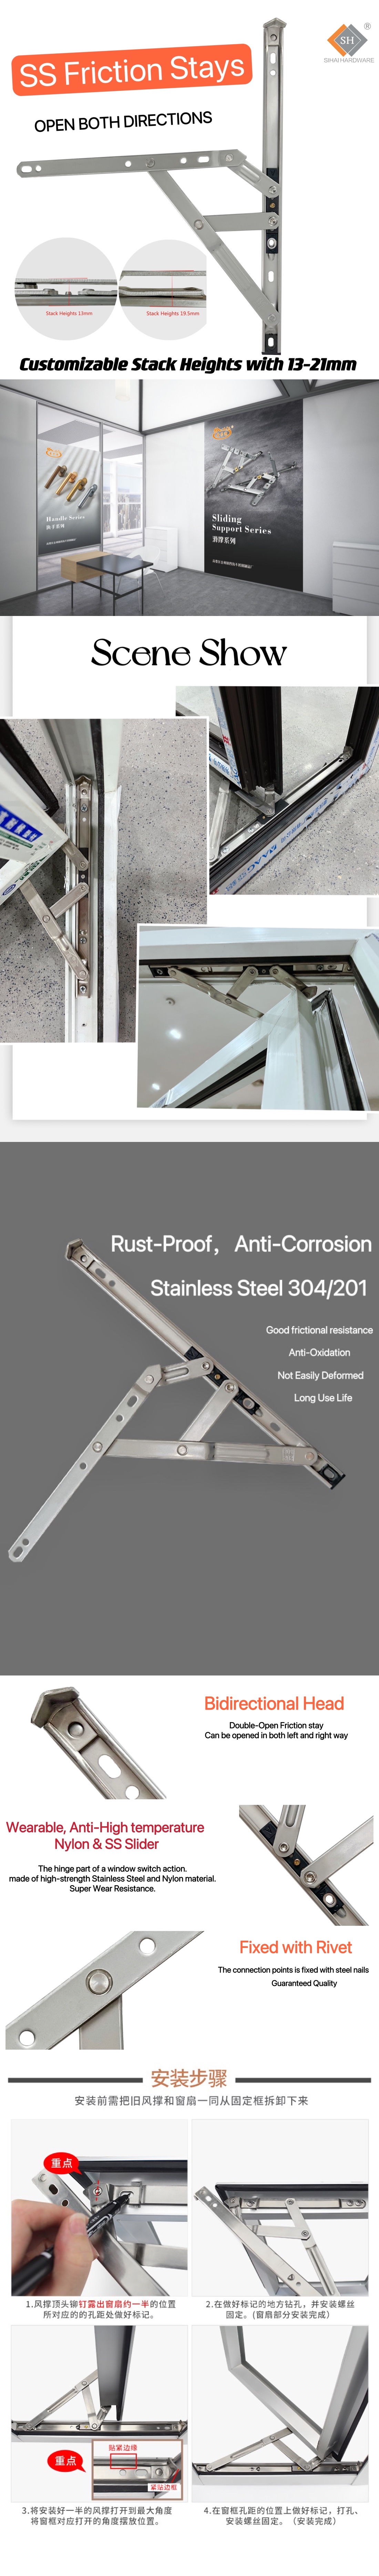 stainless steel friction stay